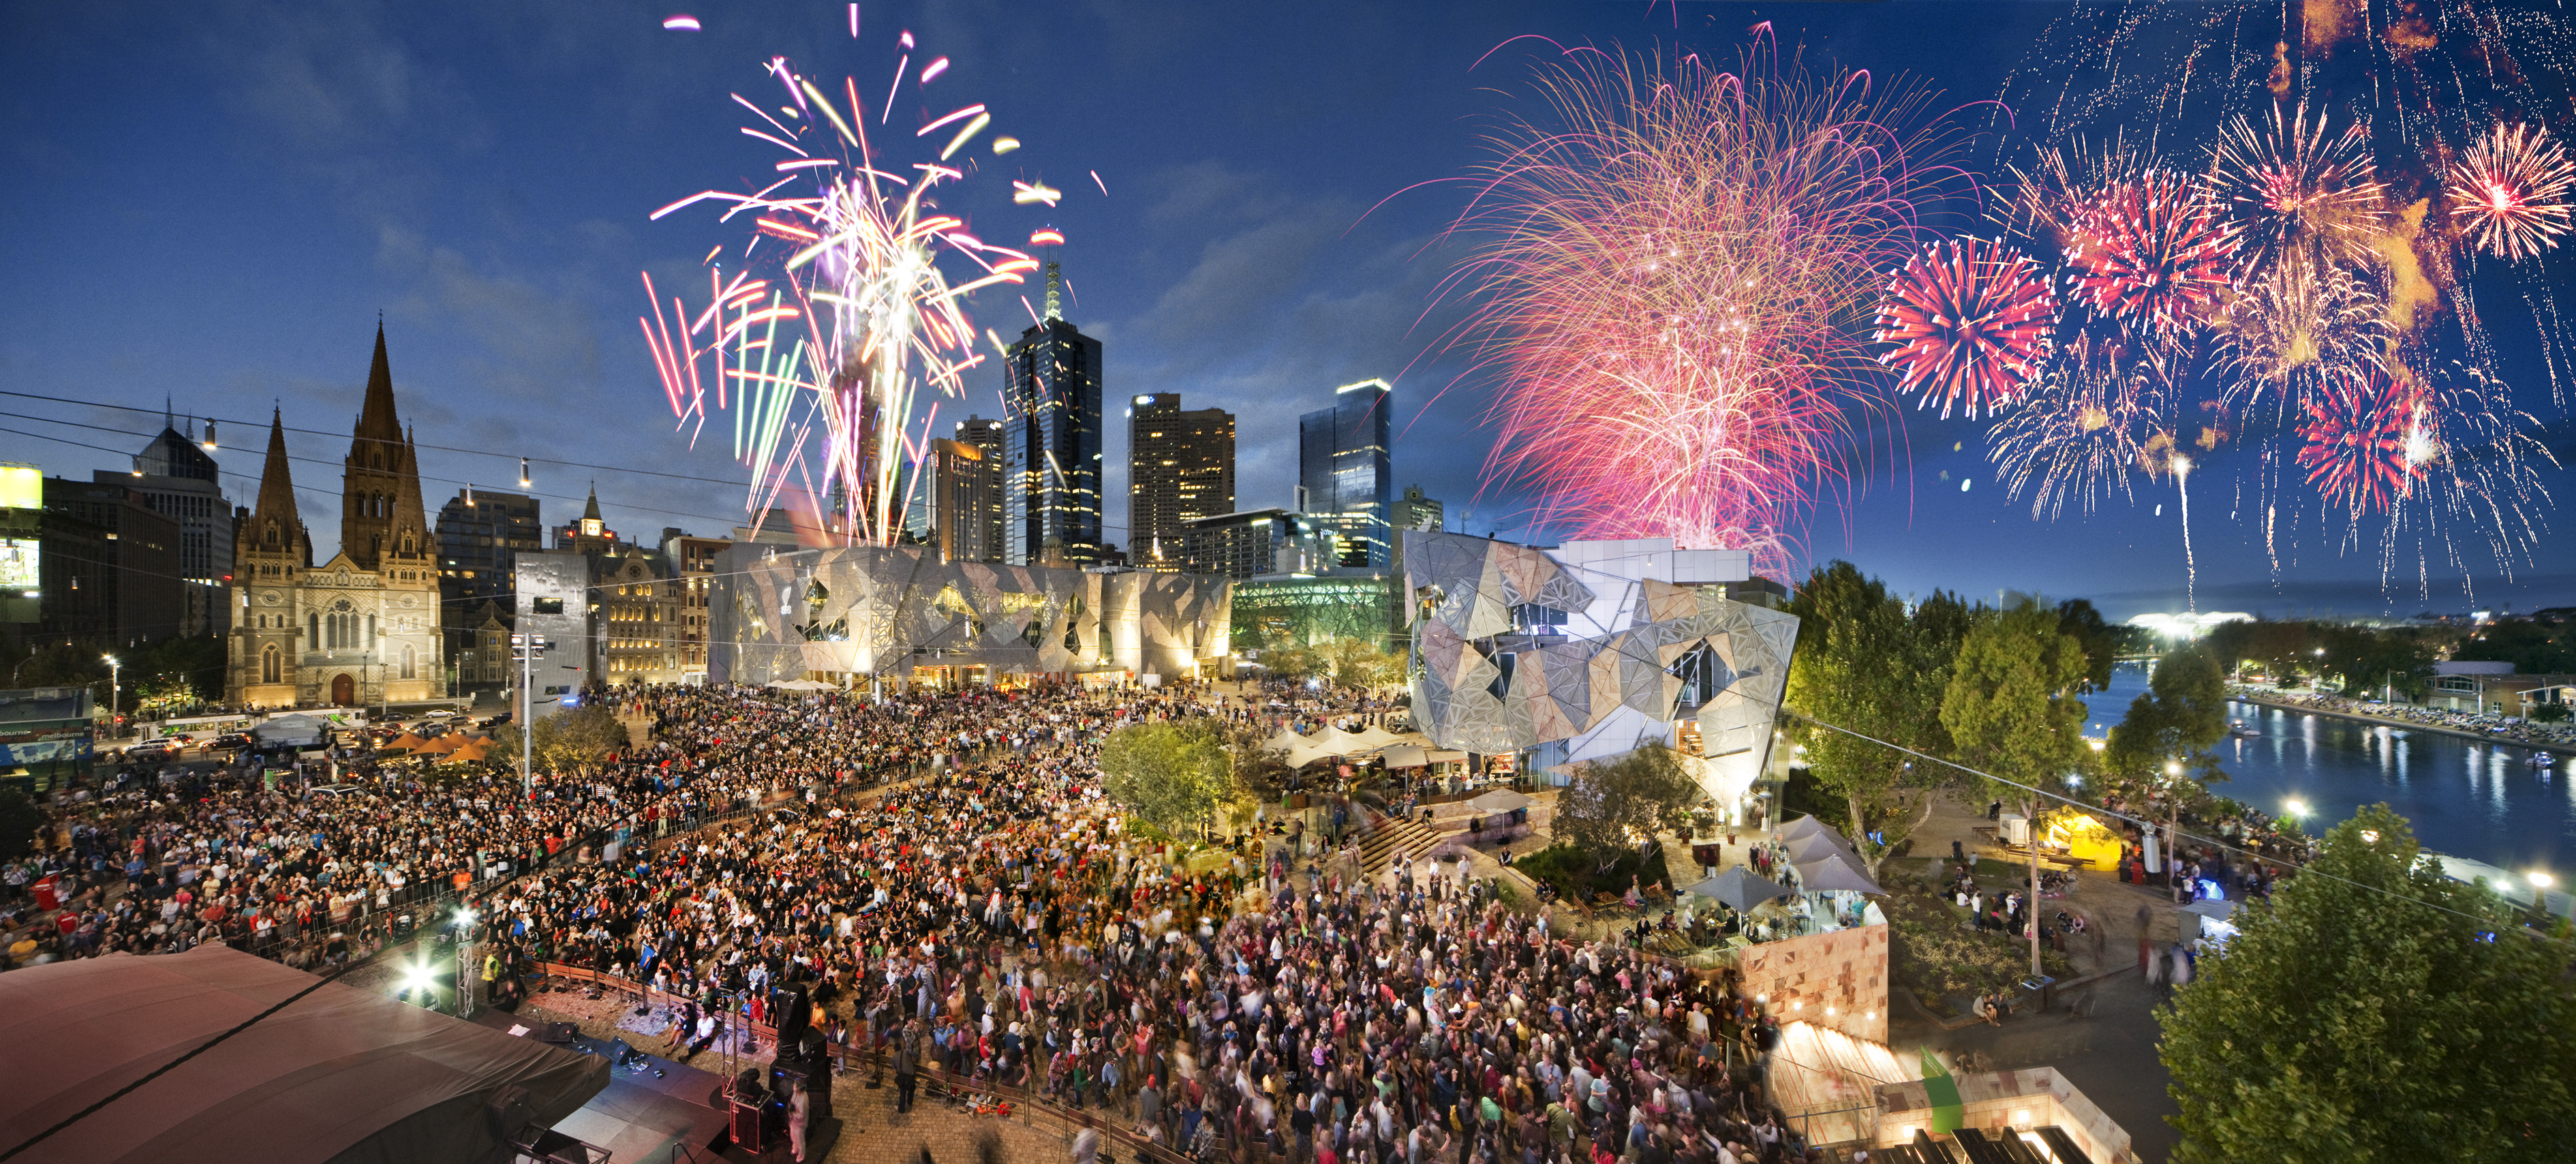 Melbourne’s New Years fireworks crowd